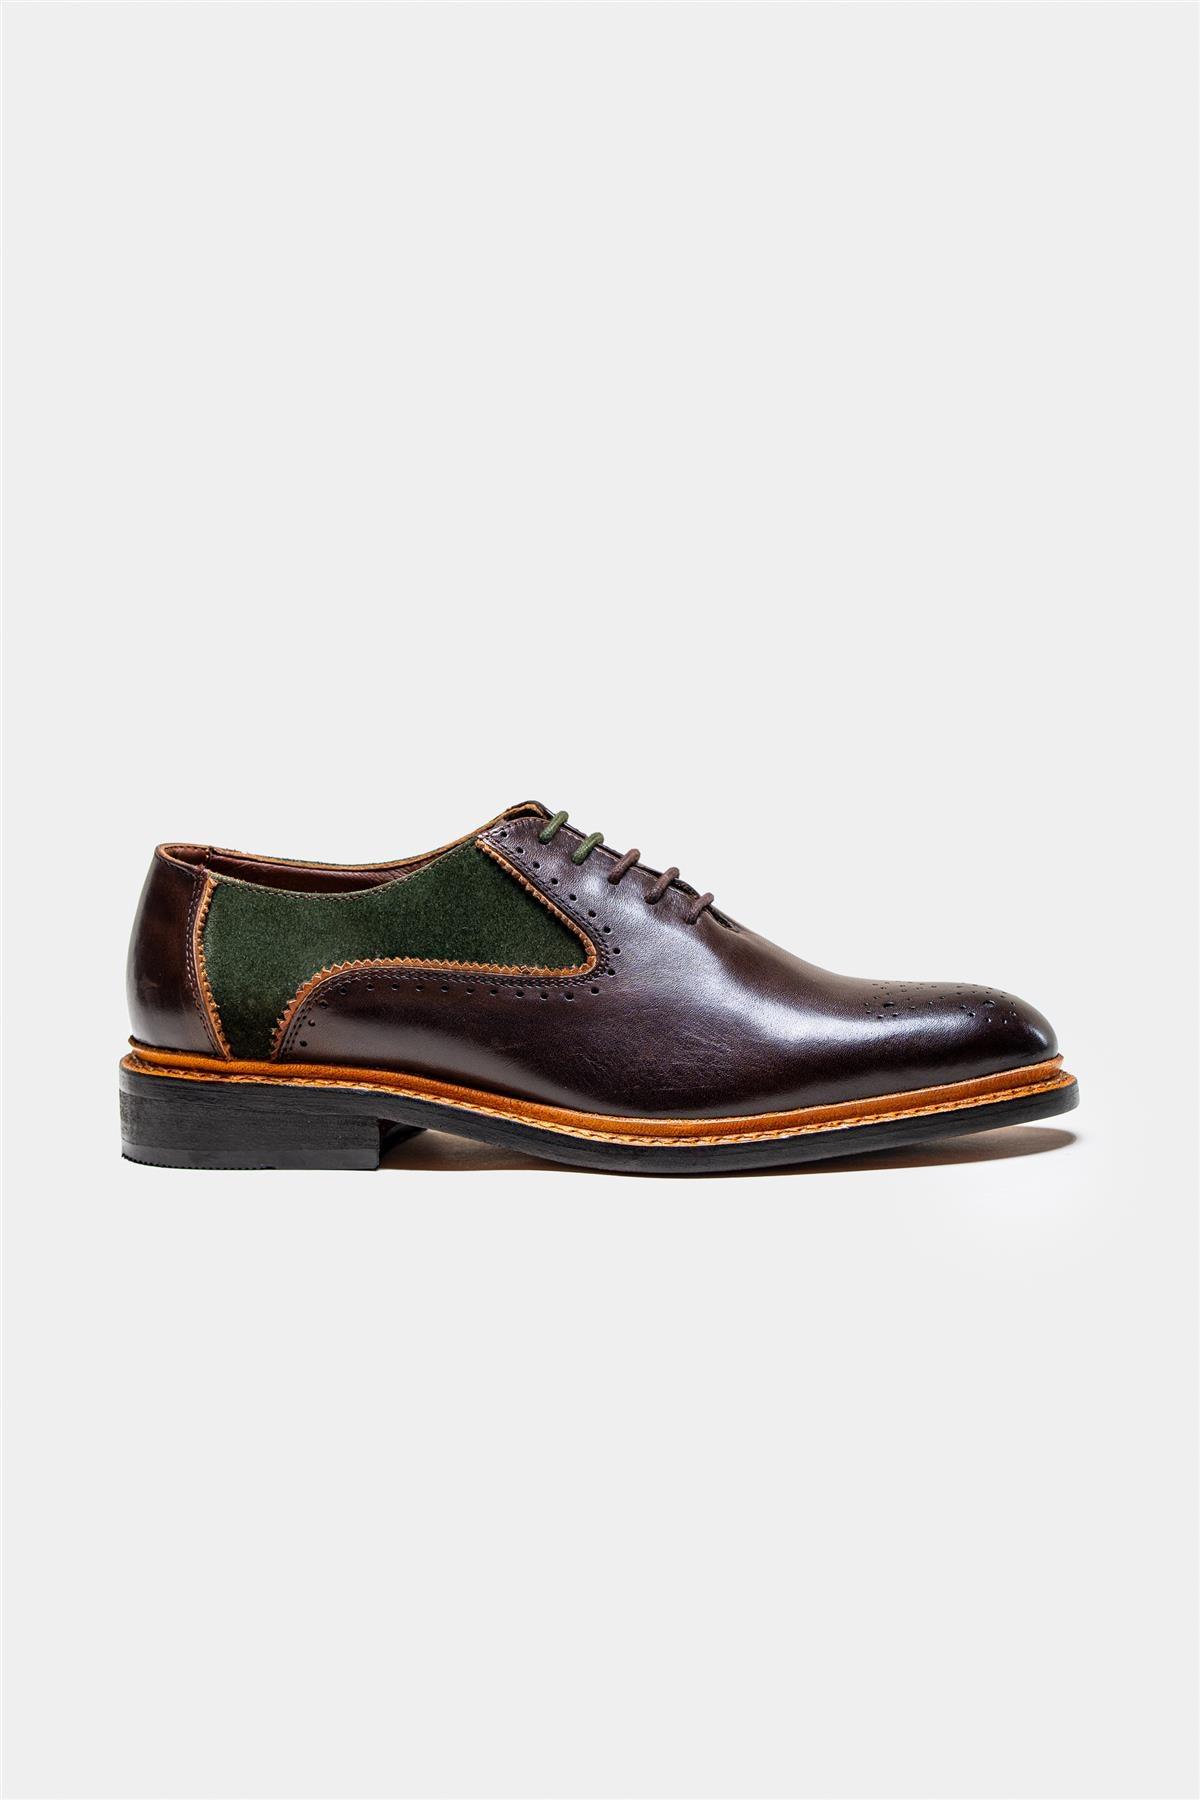 Brentwood brown/olive shoes side